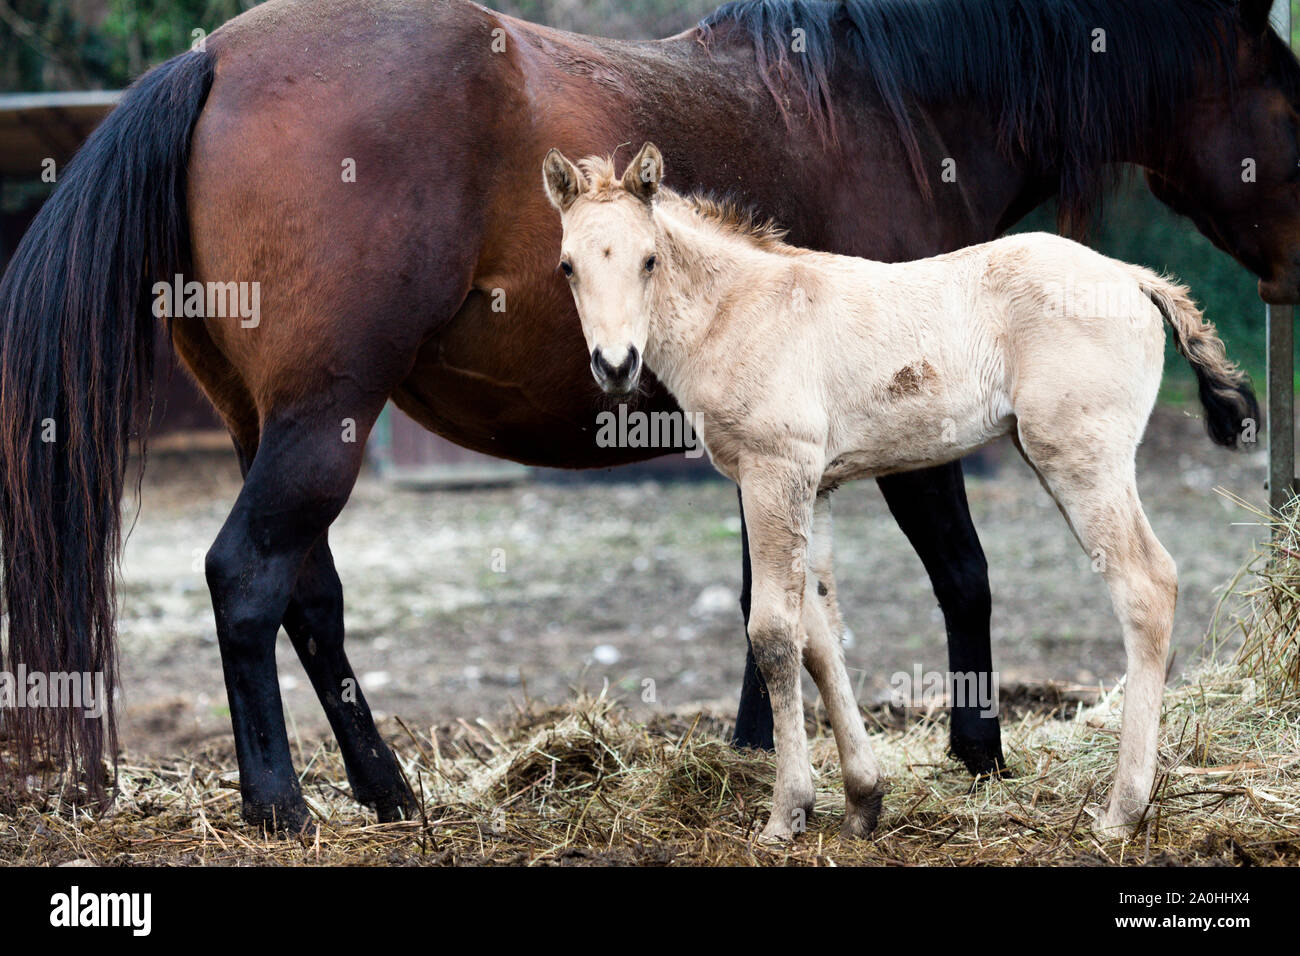 Horses Mare and foal stare at the camara, color image CANON EOS 5D mktII F5 ISO 1600 EF L 100-400 mm Stock Photo